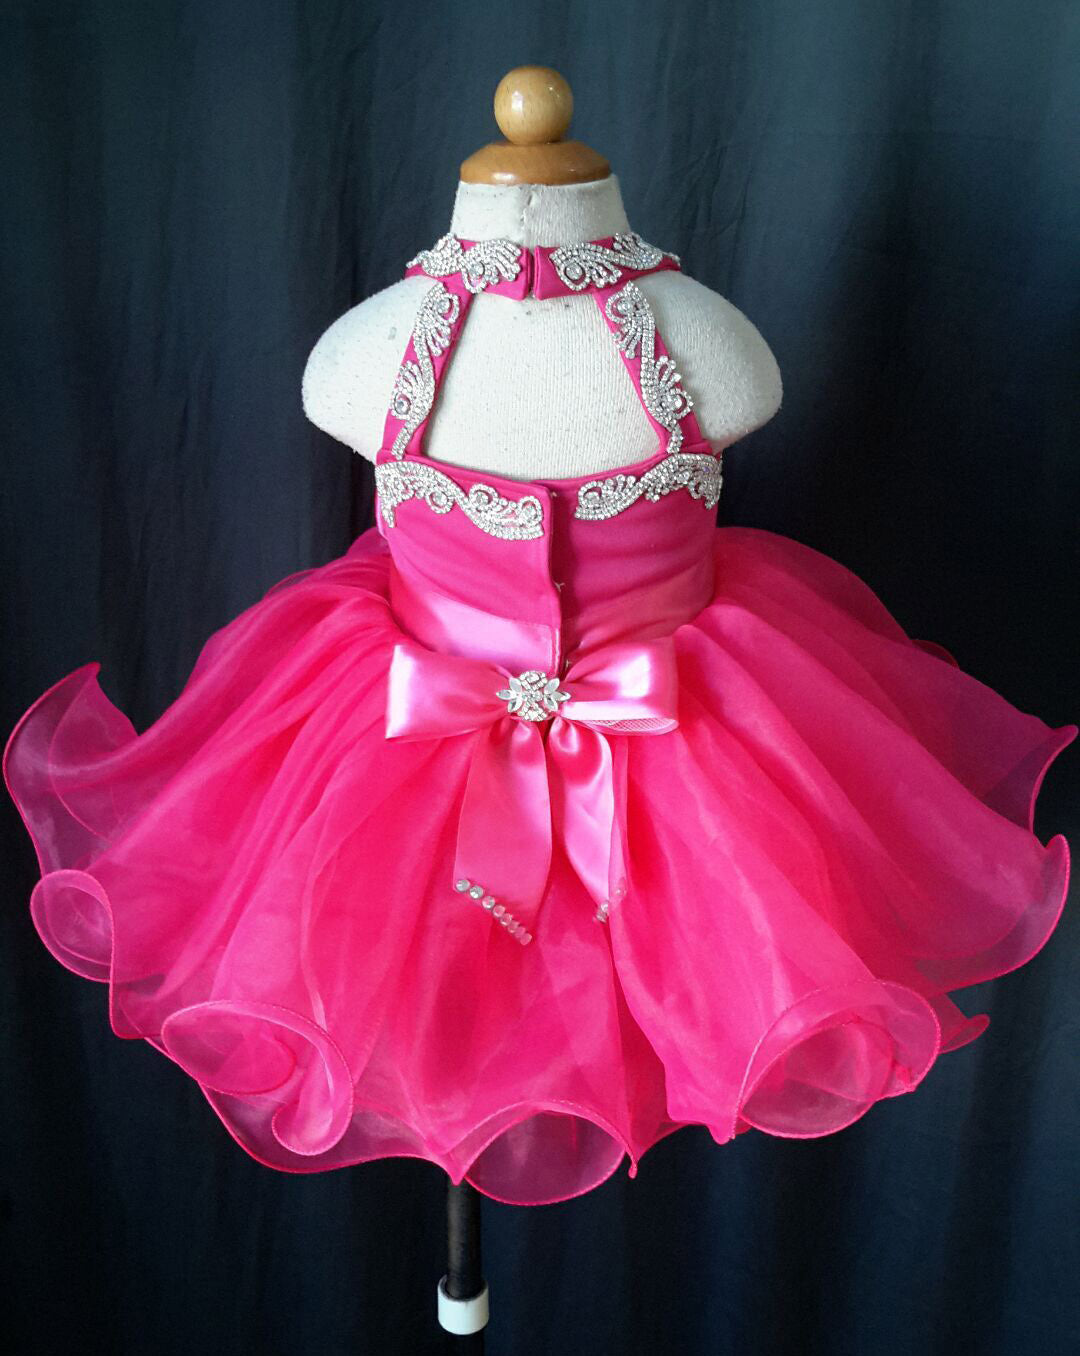 Custom Made Infant Fuchsia Baby Doll Pageant Dress - ToddlerPageantDress